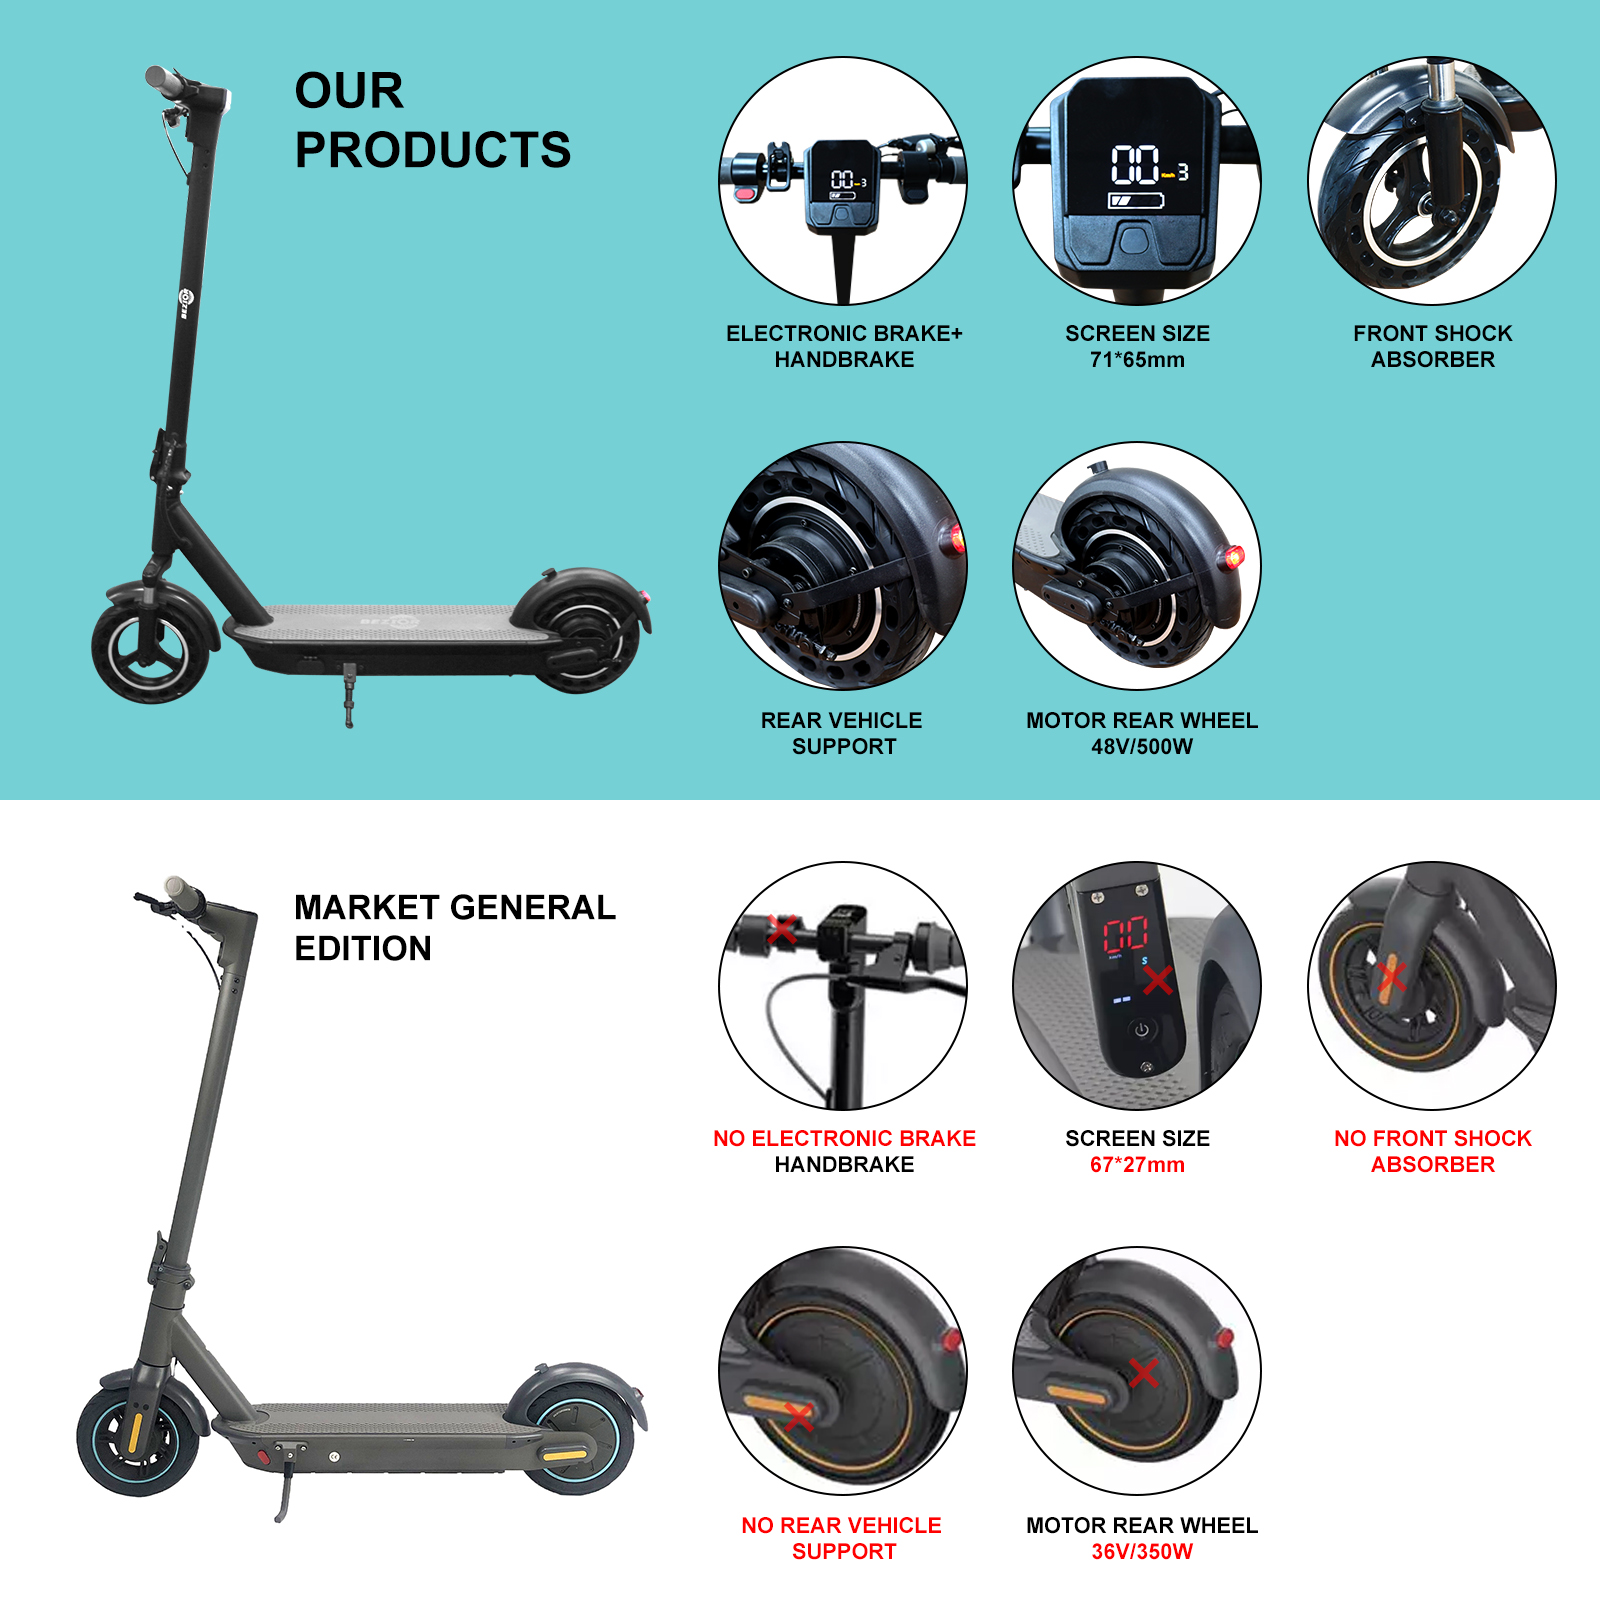 BEZIOR S500 MAX 10 inch Vaccum Pump tires Folding Electric Scooter 500W Motor 48V 15Ah Battery Max speed 35km/h Max load 120KG - Black